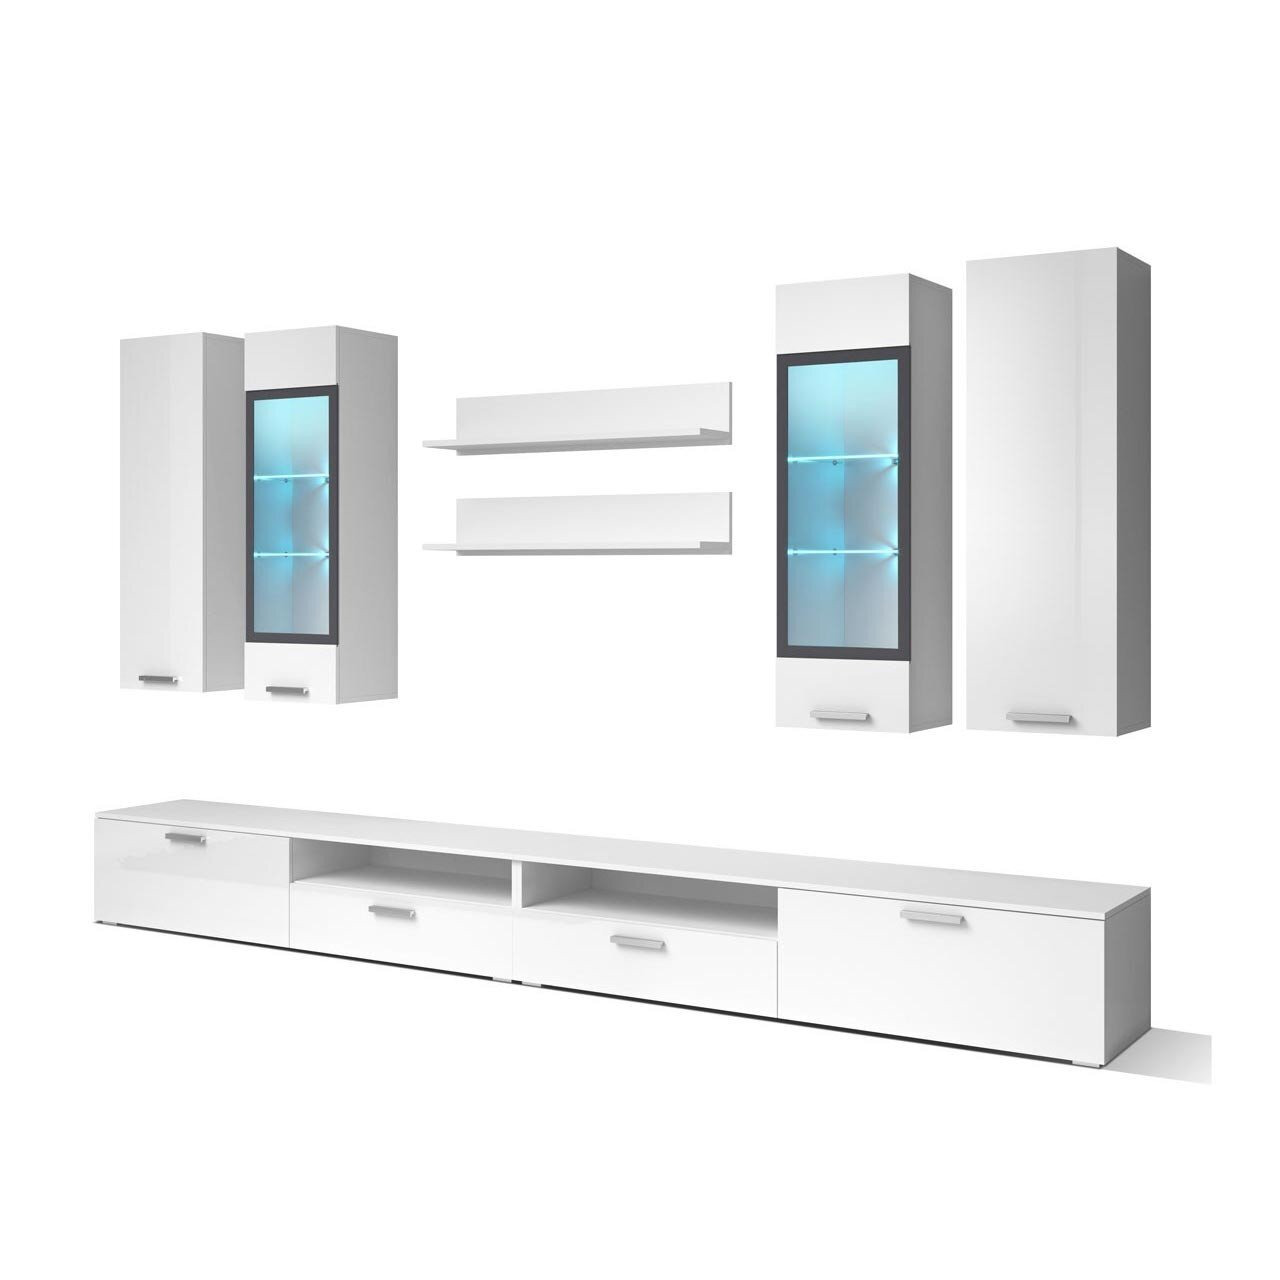 "Sarah 10 Entertainment Unit For TVs Up To 58"" - White Gloss 280cm" - image 1